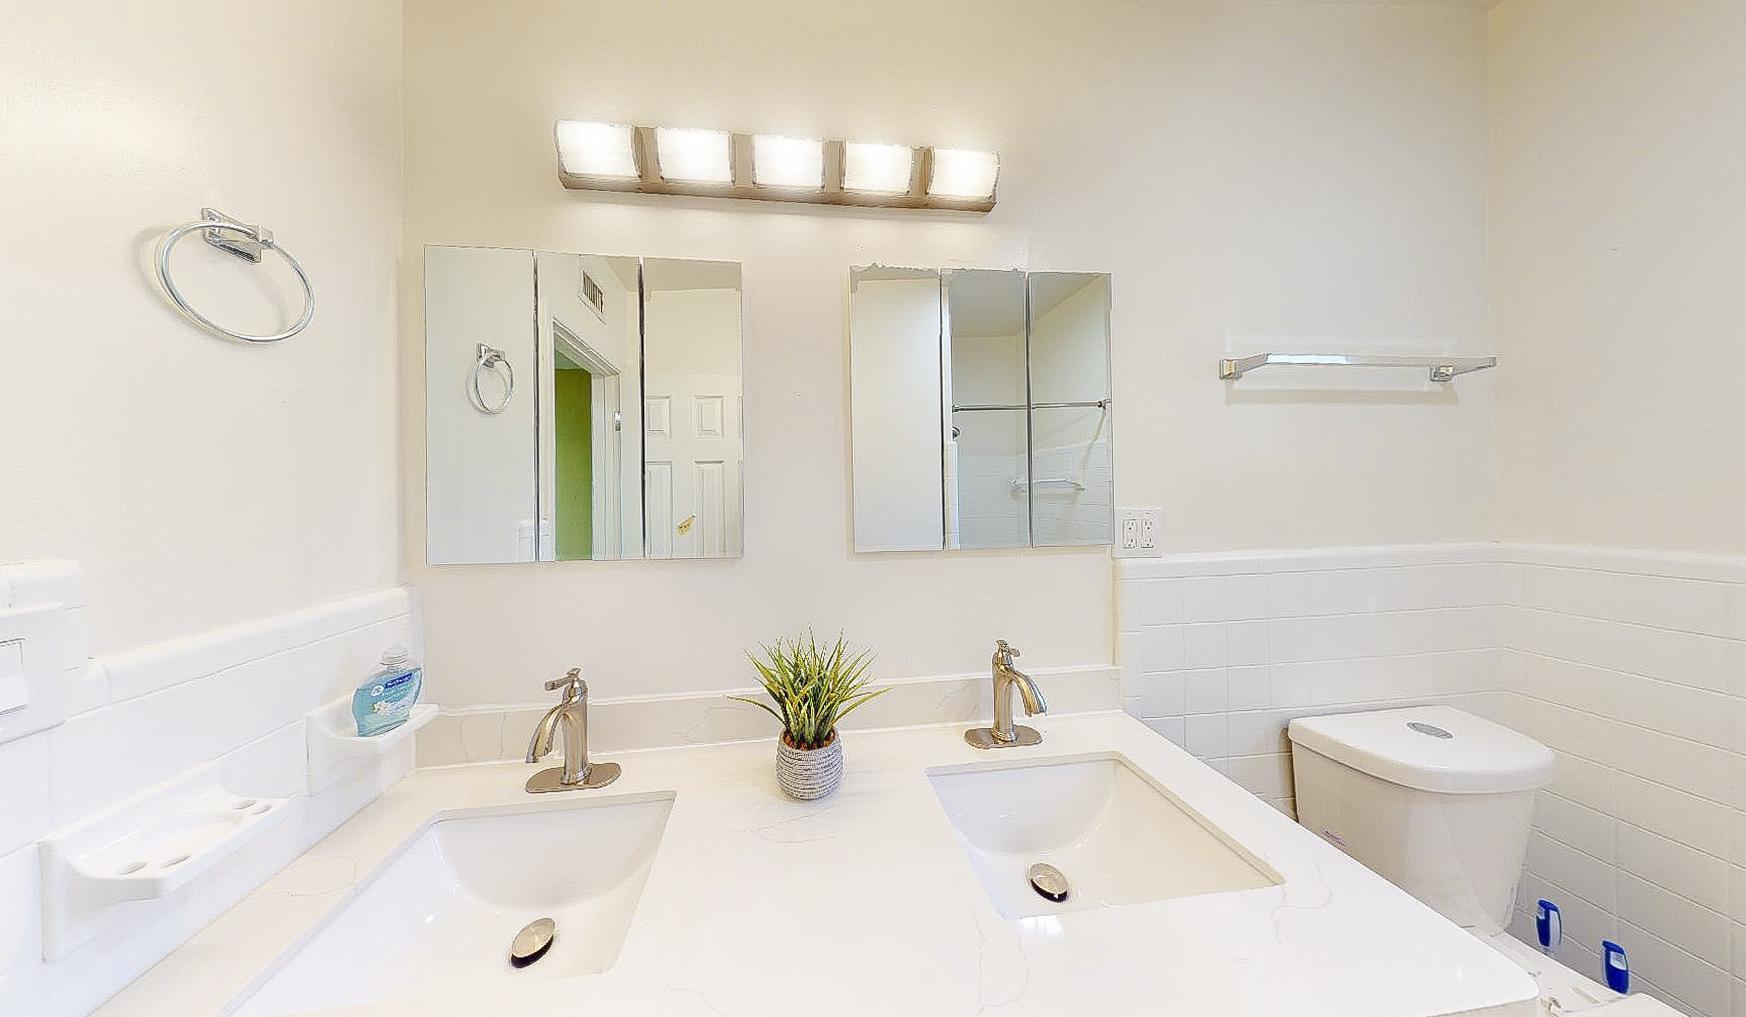 Bathroom with double sinks and storage in medicine cabinets